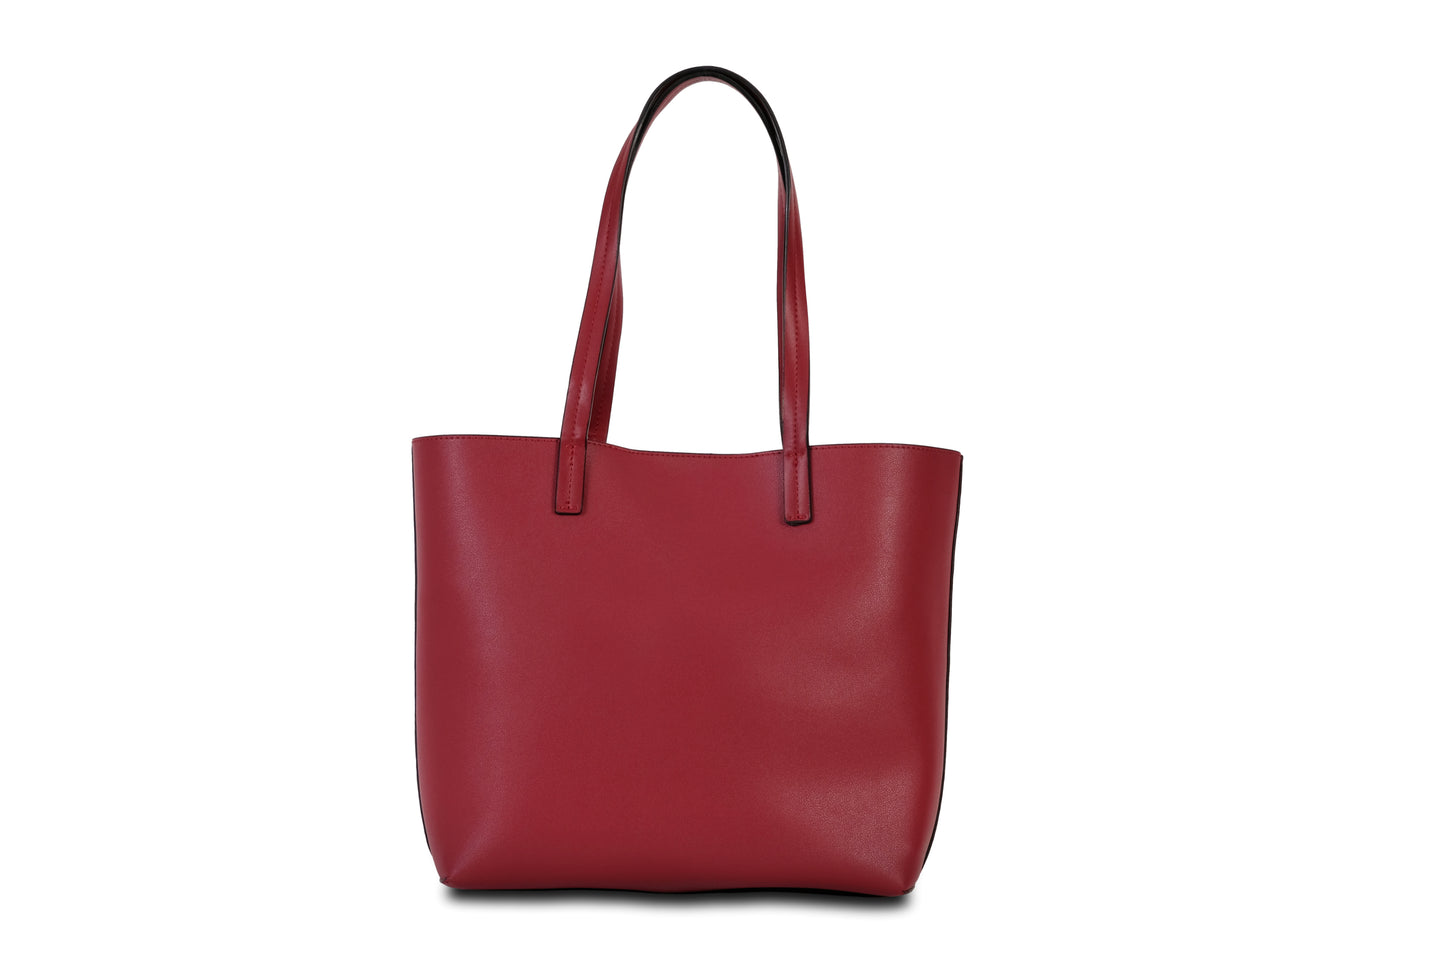 Rowi Pebble Grain Faux Leather Scarlet Red Tote Bag Handbag made by Dewi Maya back view available at the best boutique in Upstate South Carolina Spartanburg Greenville Dewi Maya Boutique